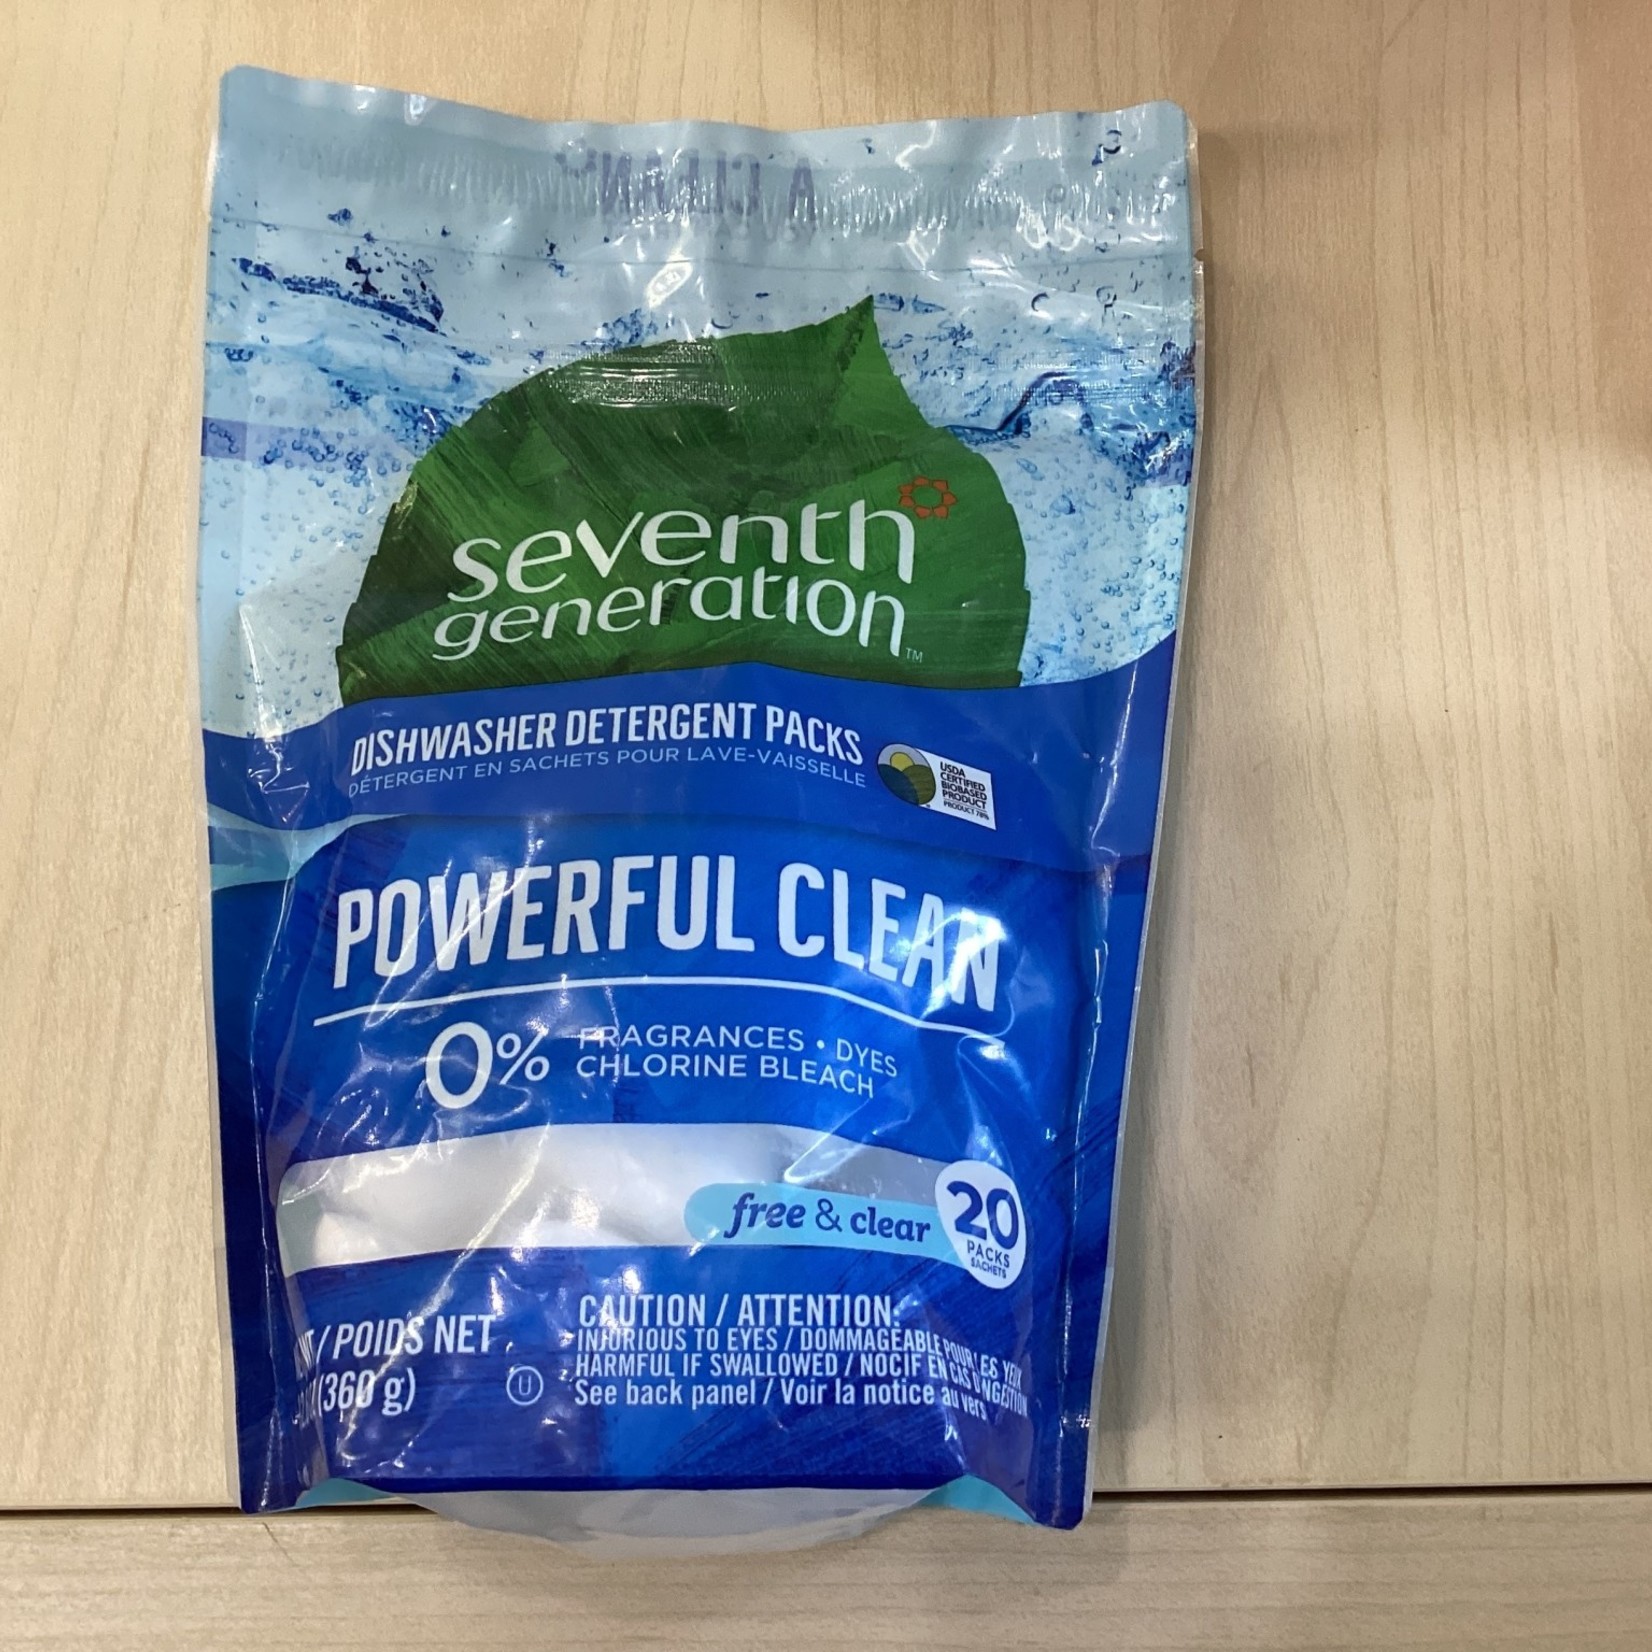 Seventh generation  Powerful Clean 20 packs free & clear